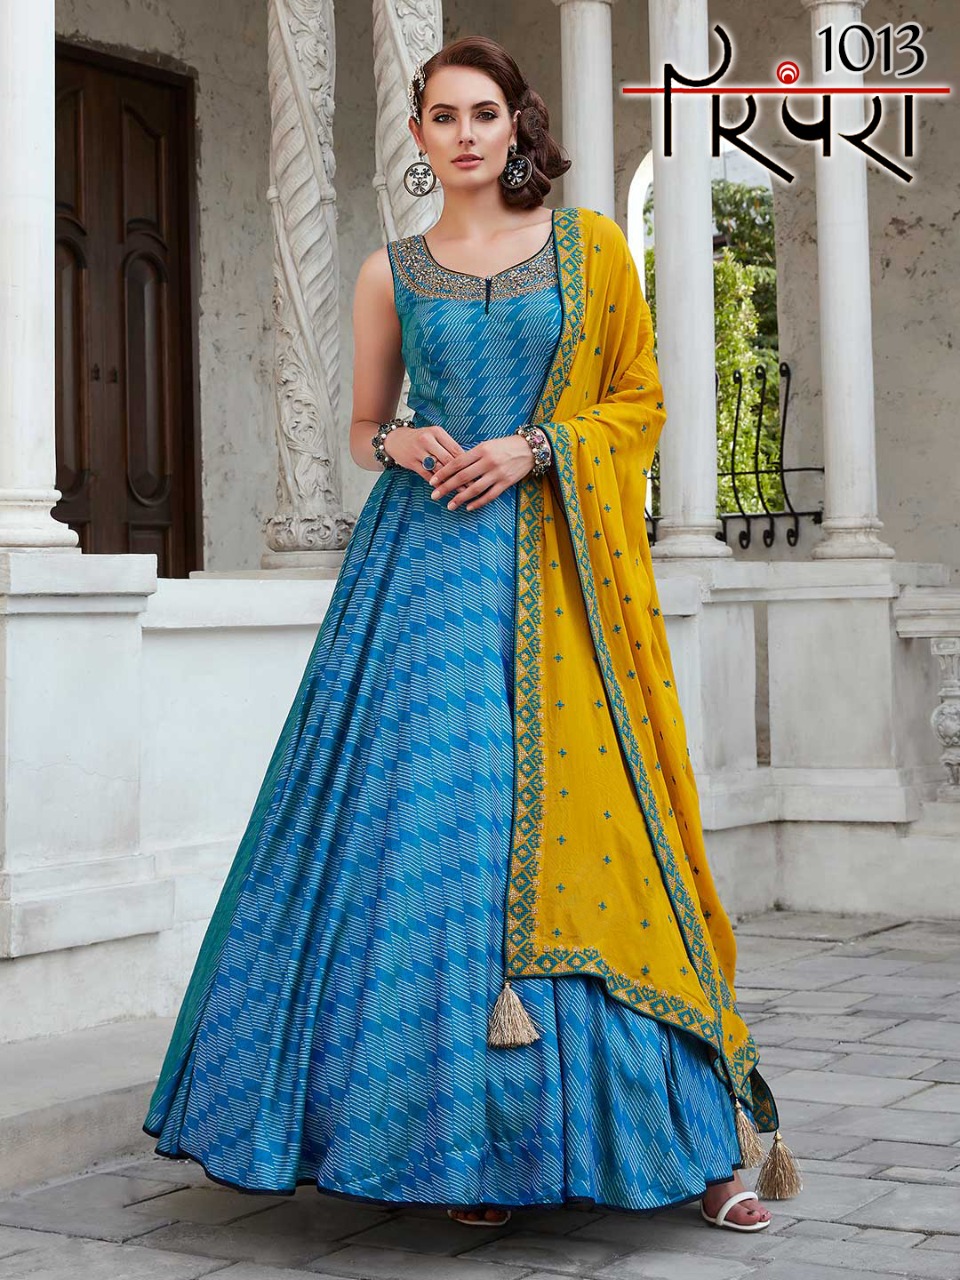 Parampara Vol 3 Designer Long Gown With Dupatta Wedding Collection